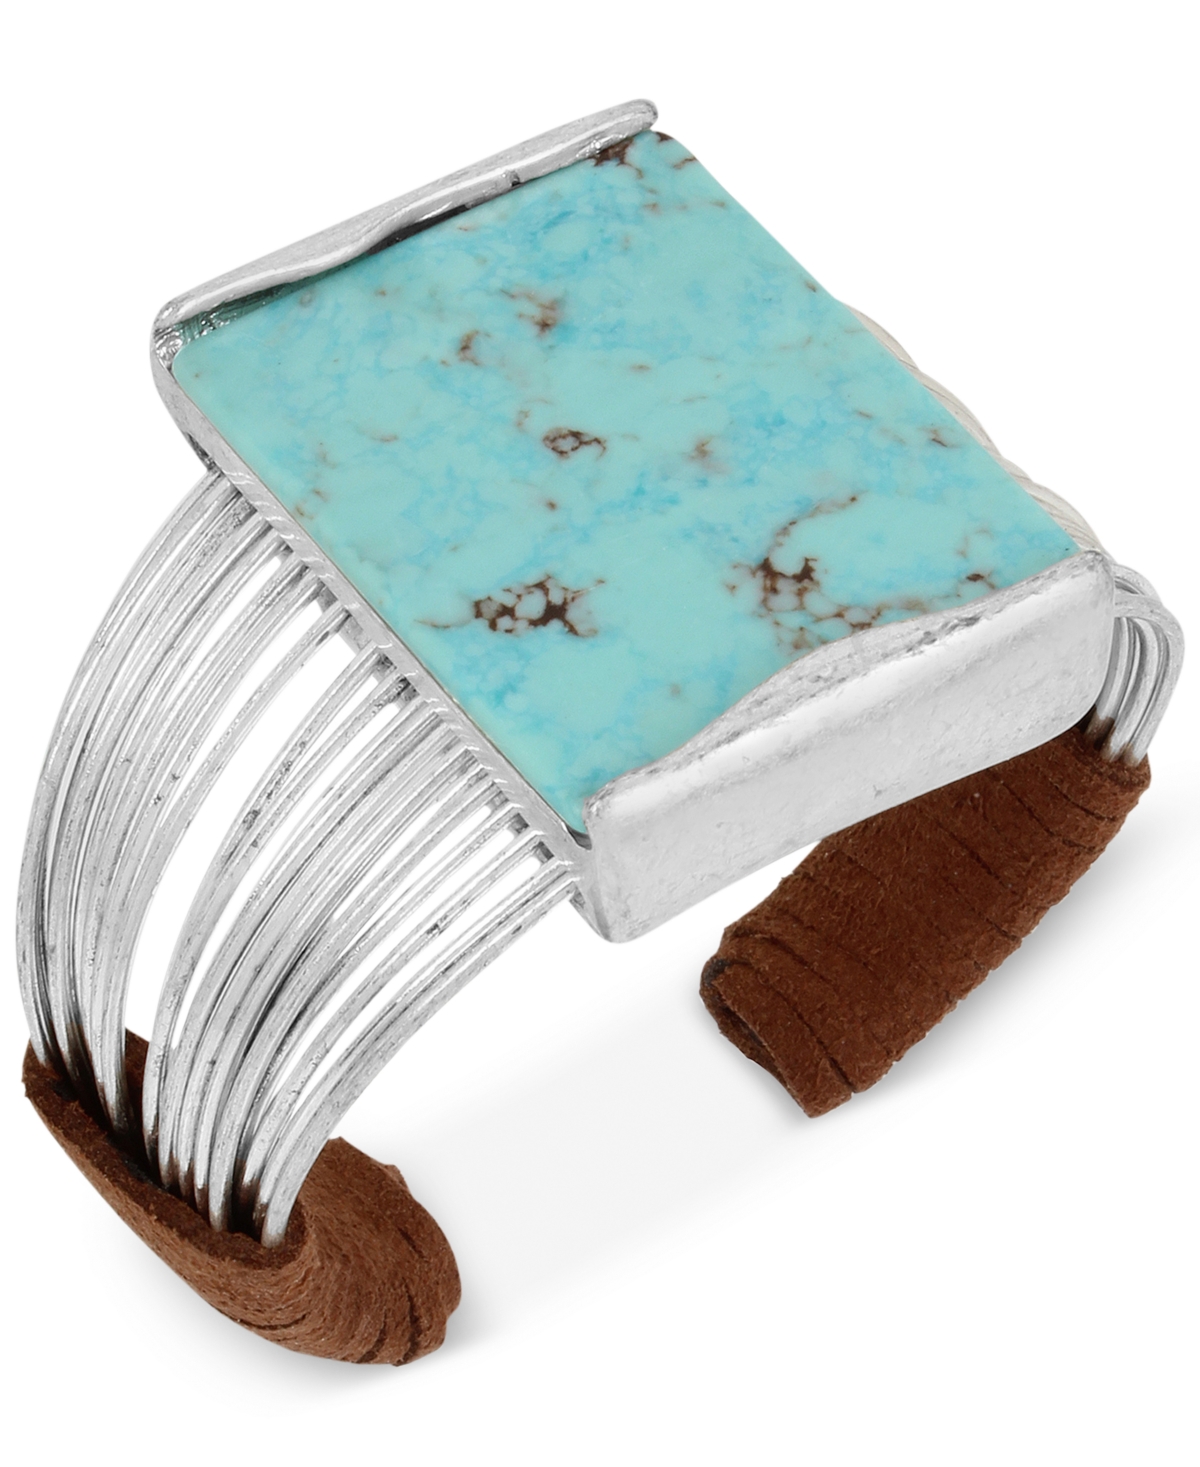 Silver-Tone Turquoise-Look Suede-Wrapped Cuff Bracelet - Silver